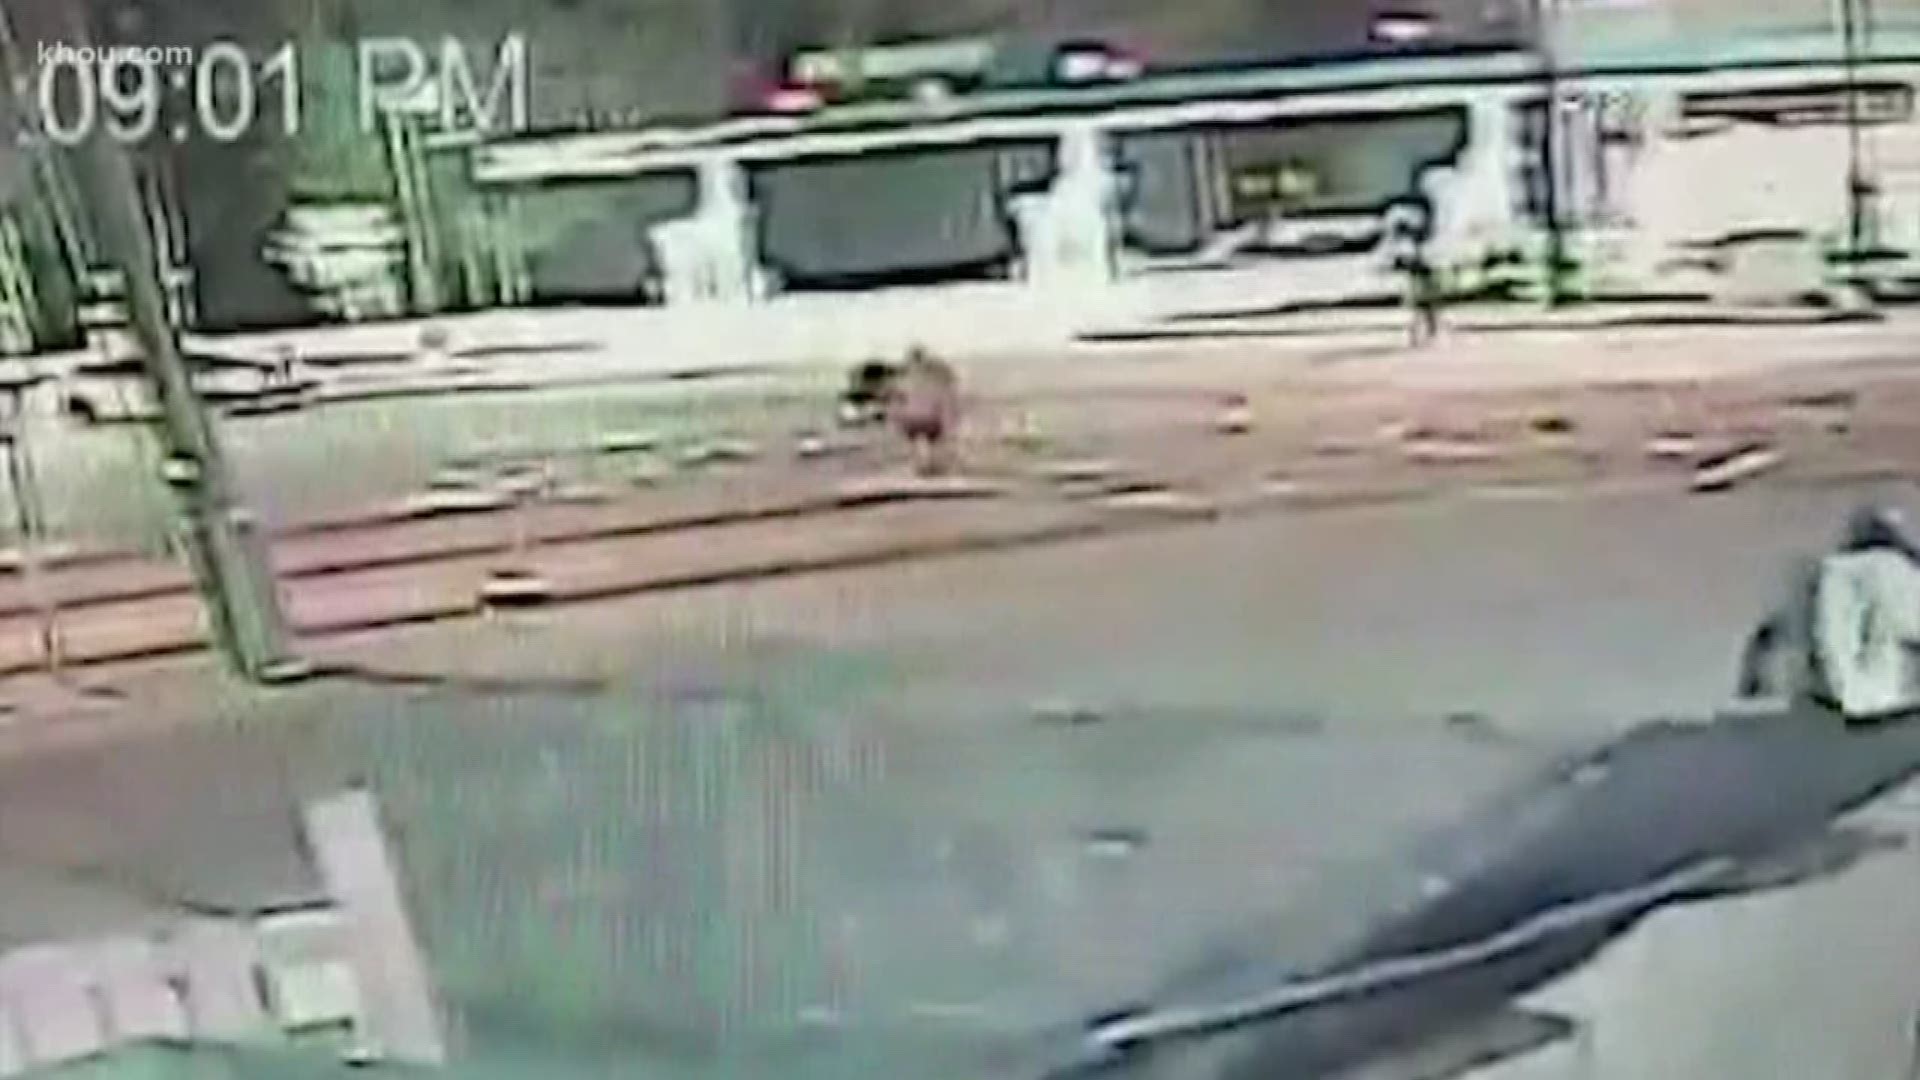 Houston police released some security video of a car barreling into a man and driving away. The driver is still on the loose and police need your help finding them.